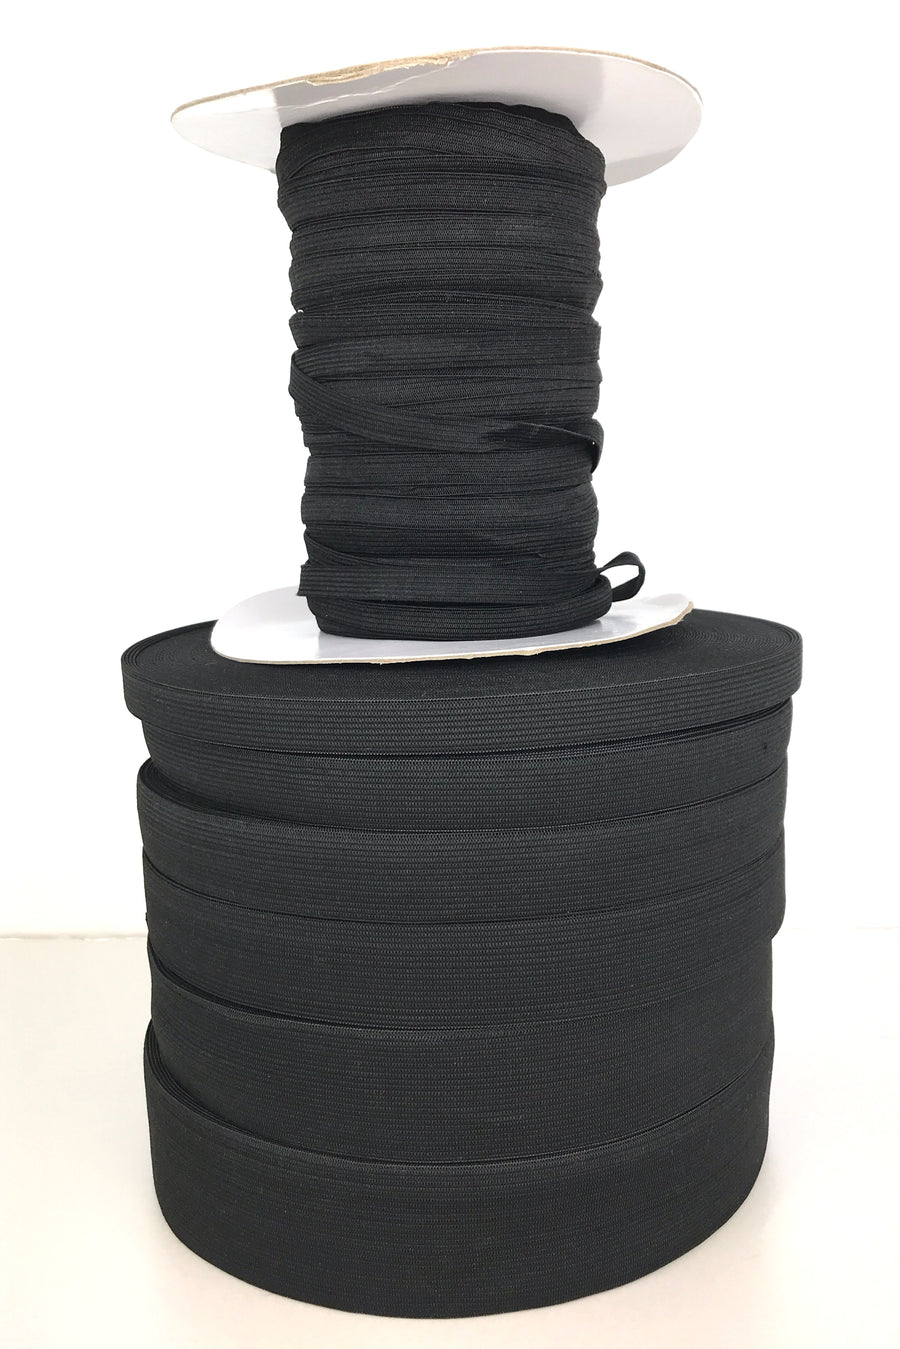 High-quality flat woven elastic in black, perfect for waistbands, cuffs, crafts, and general sewing projects. Offers excellent durability and elasticity for a wide range of applications, ensuring comfort and reliability in your creations